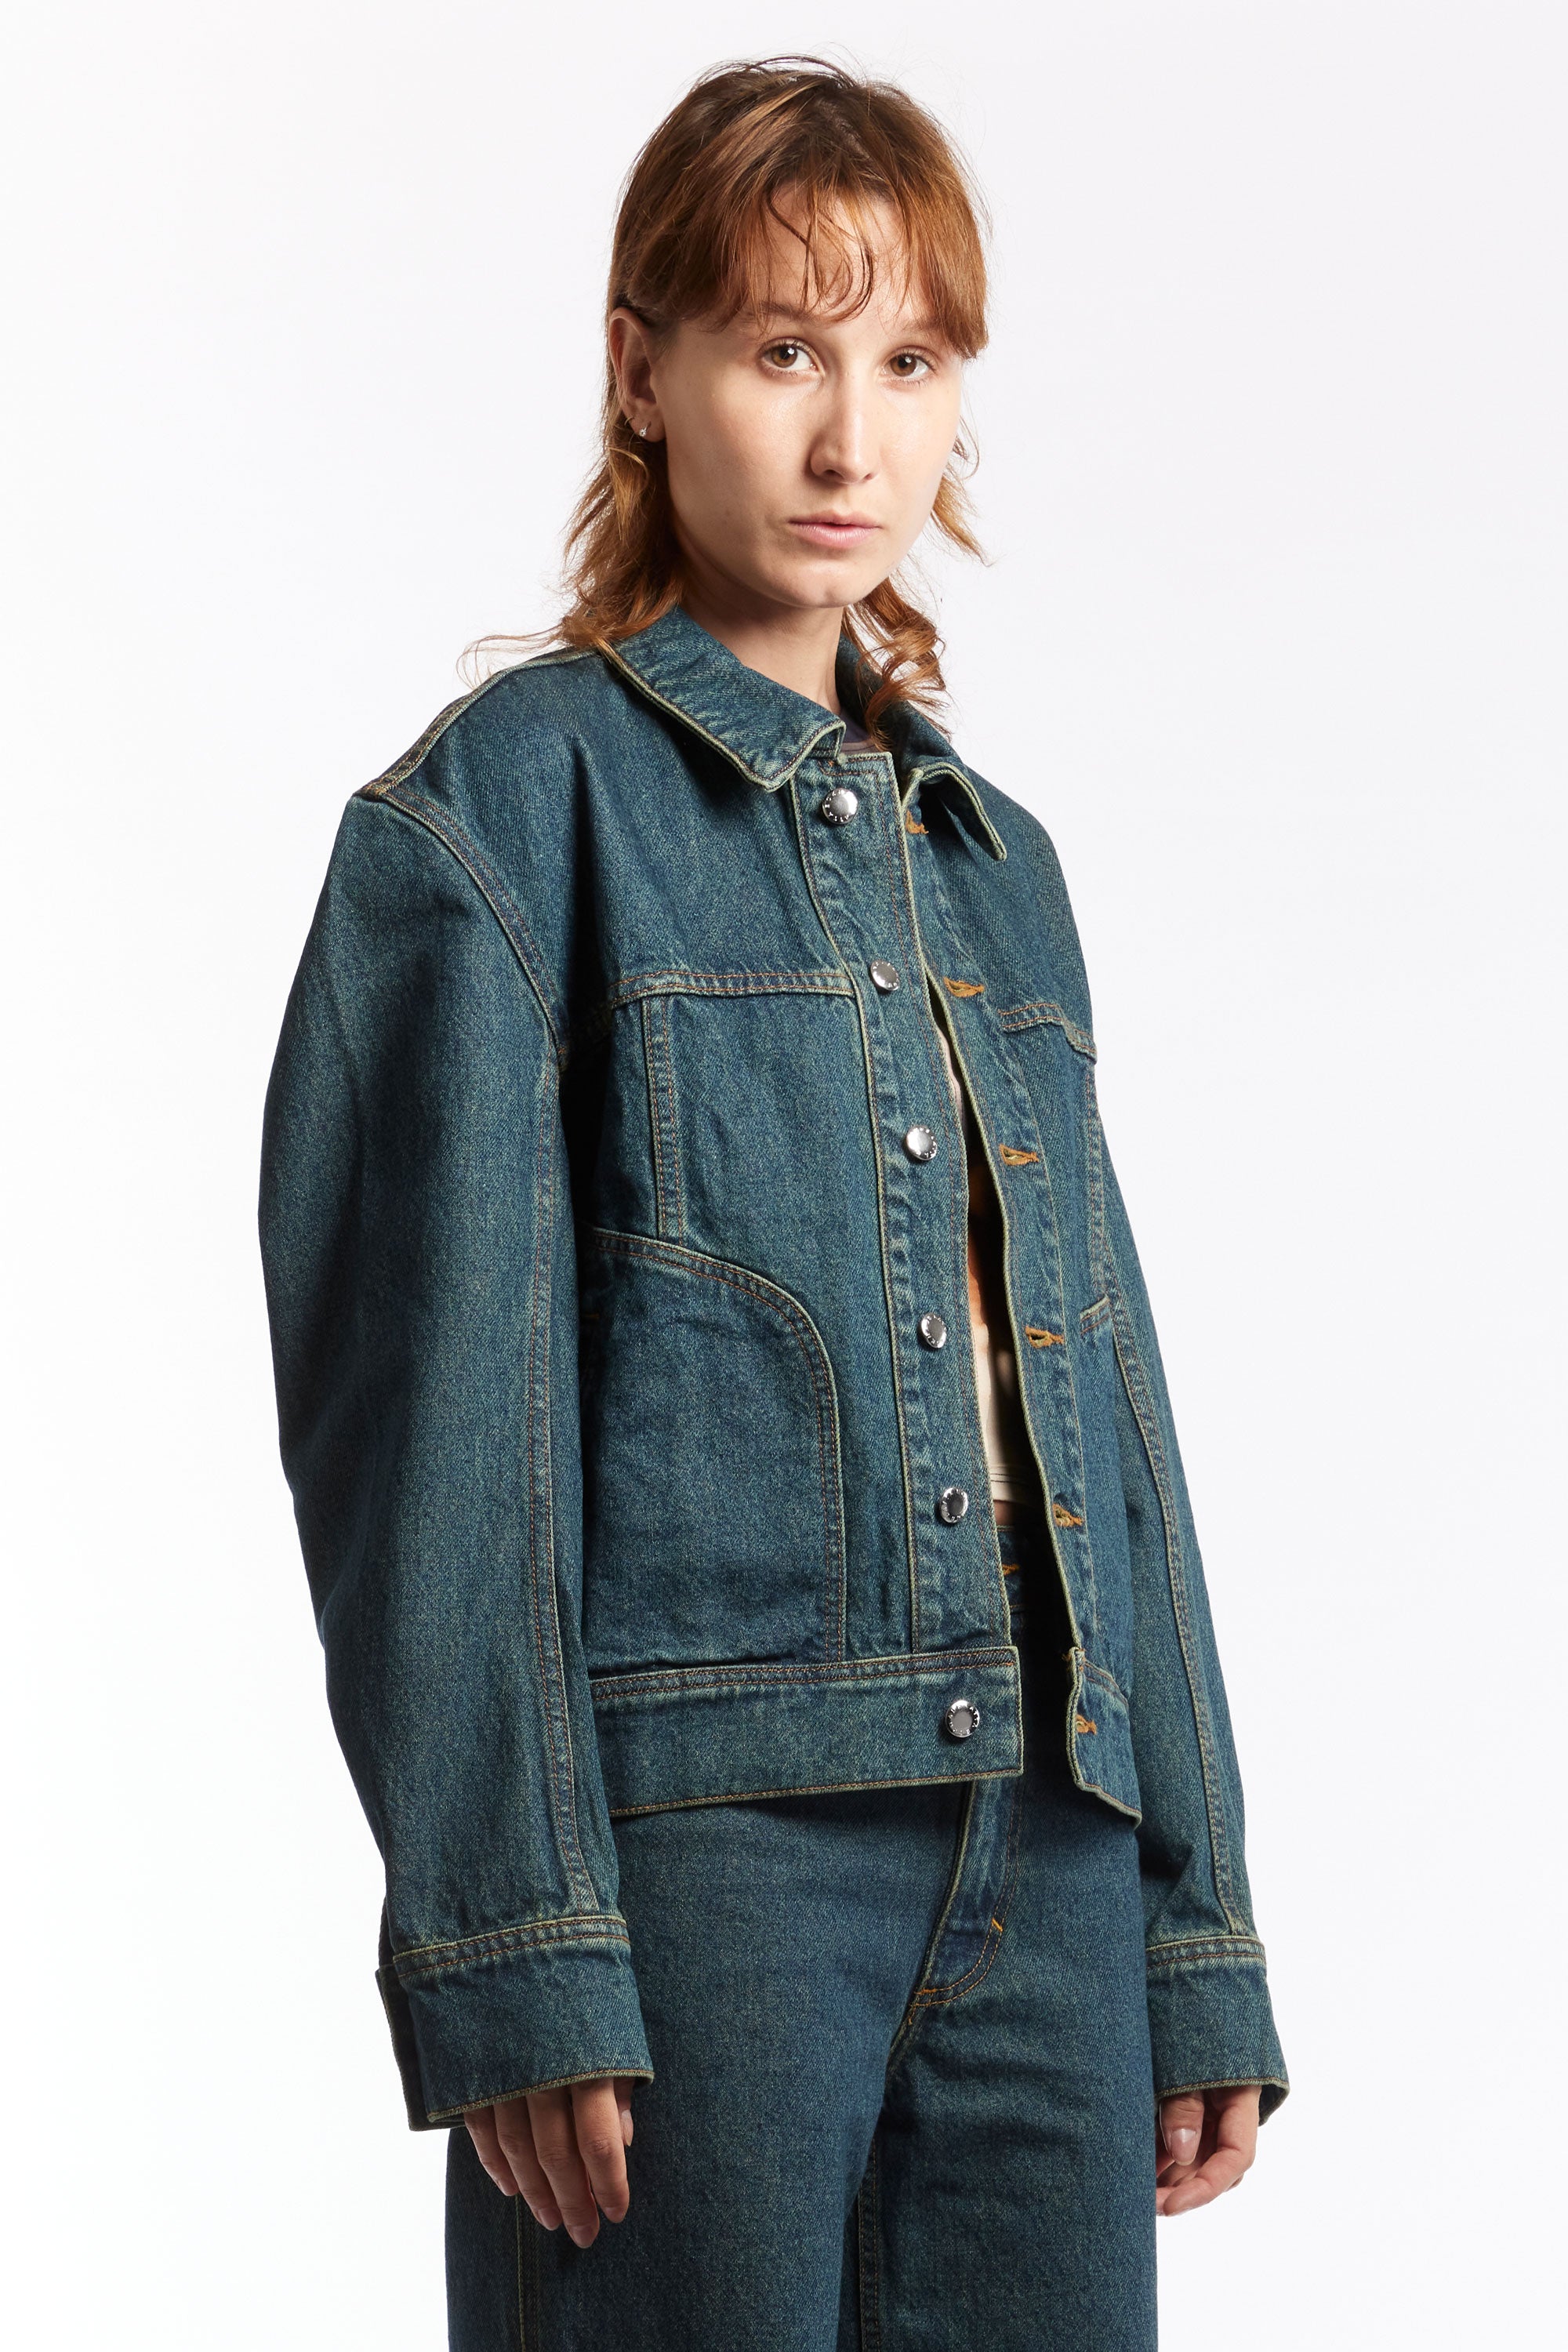 The ECKHAUS LATTA - EL JACKET NEW BLUE  available online with global shipping, and in PAM Stores Melbourne and Sydney.